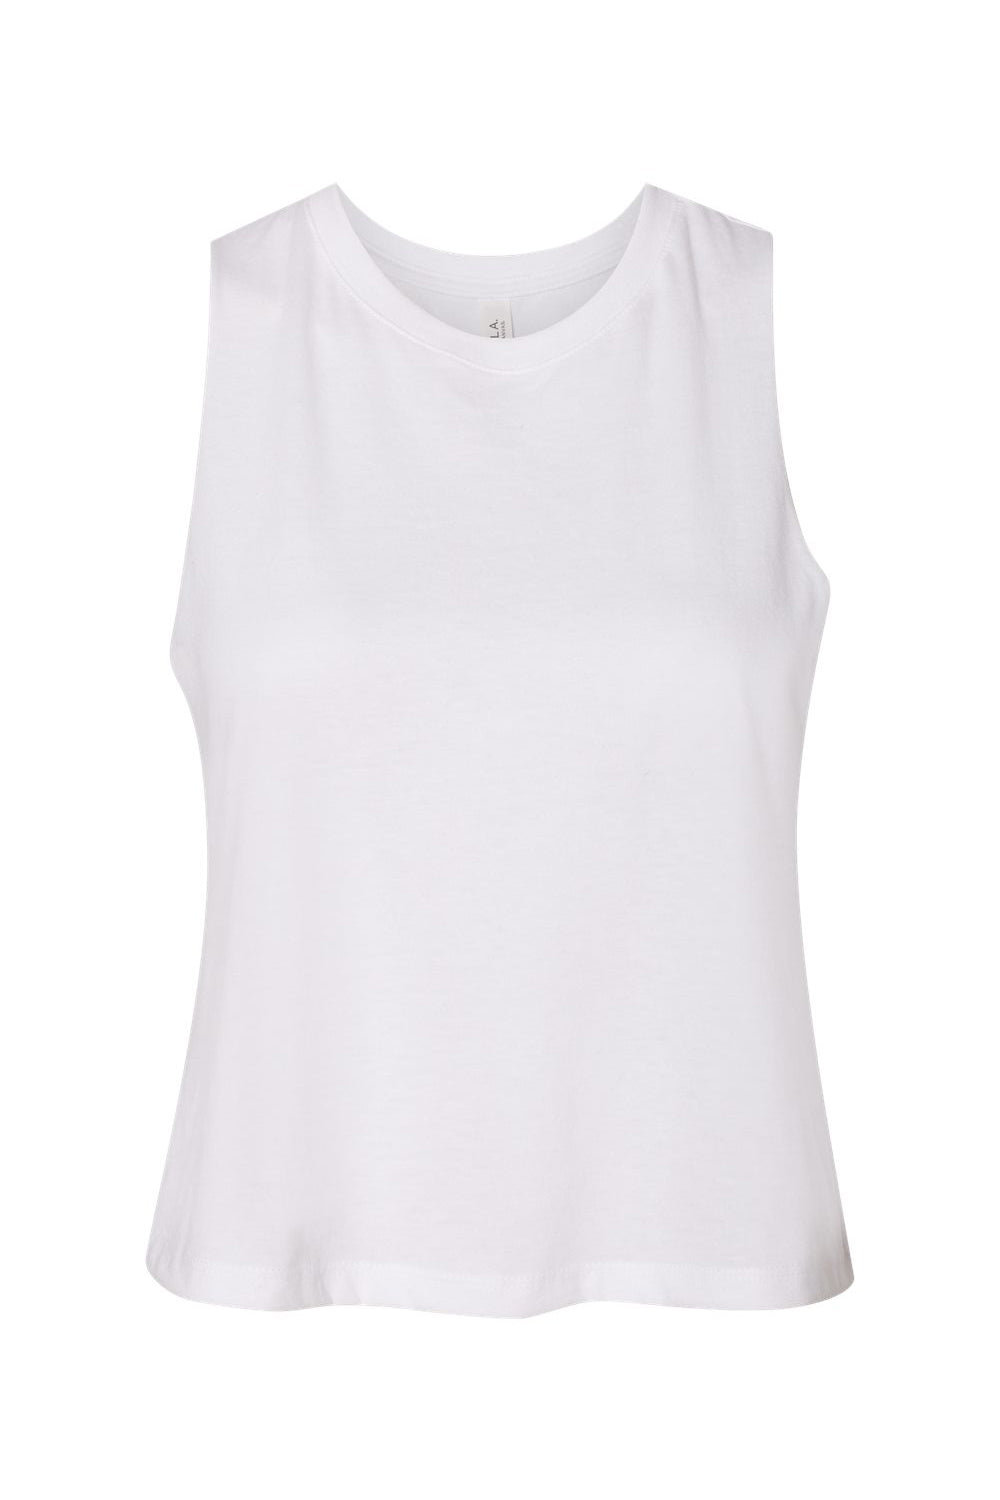 Bella + Canvas BC6682/6682 Womens Cropped Tank Top Solid White Flat Front